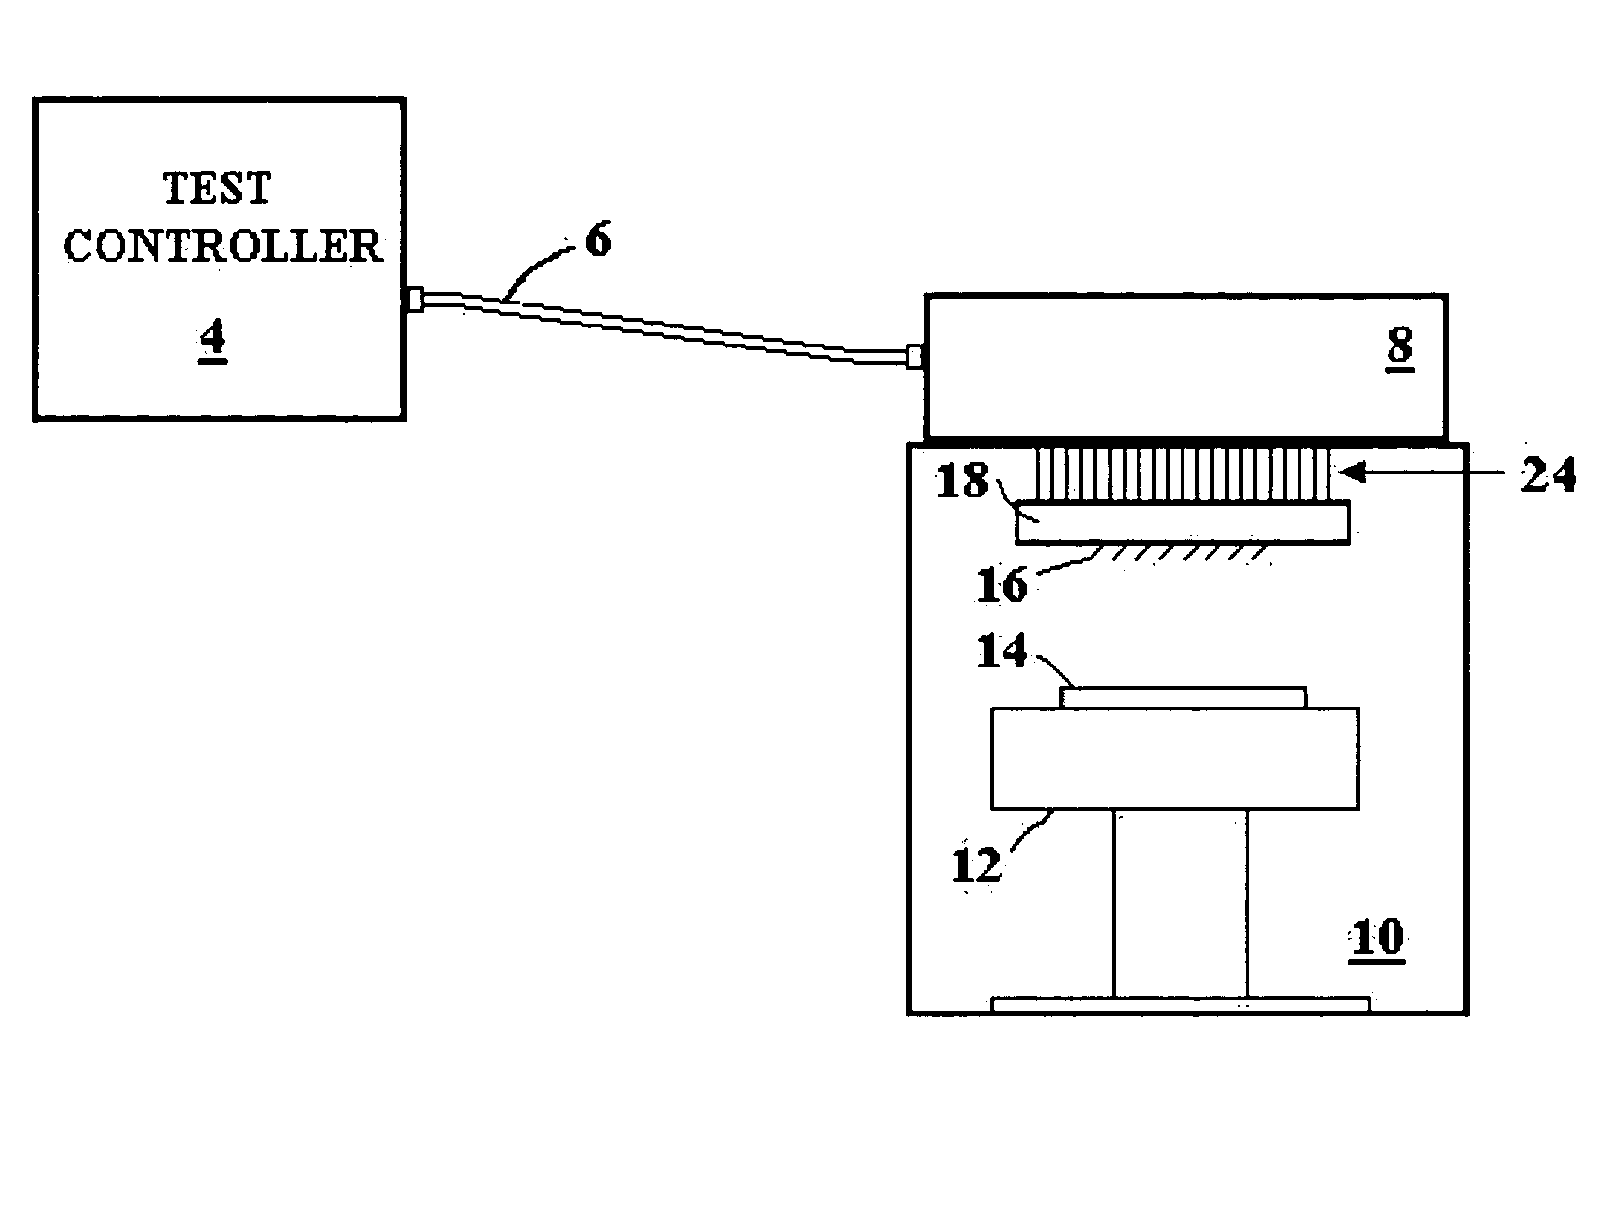 Mechanically reconfigurable vertical tester interface for IC probing